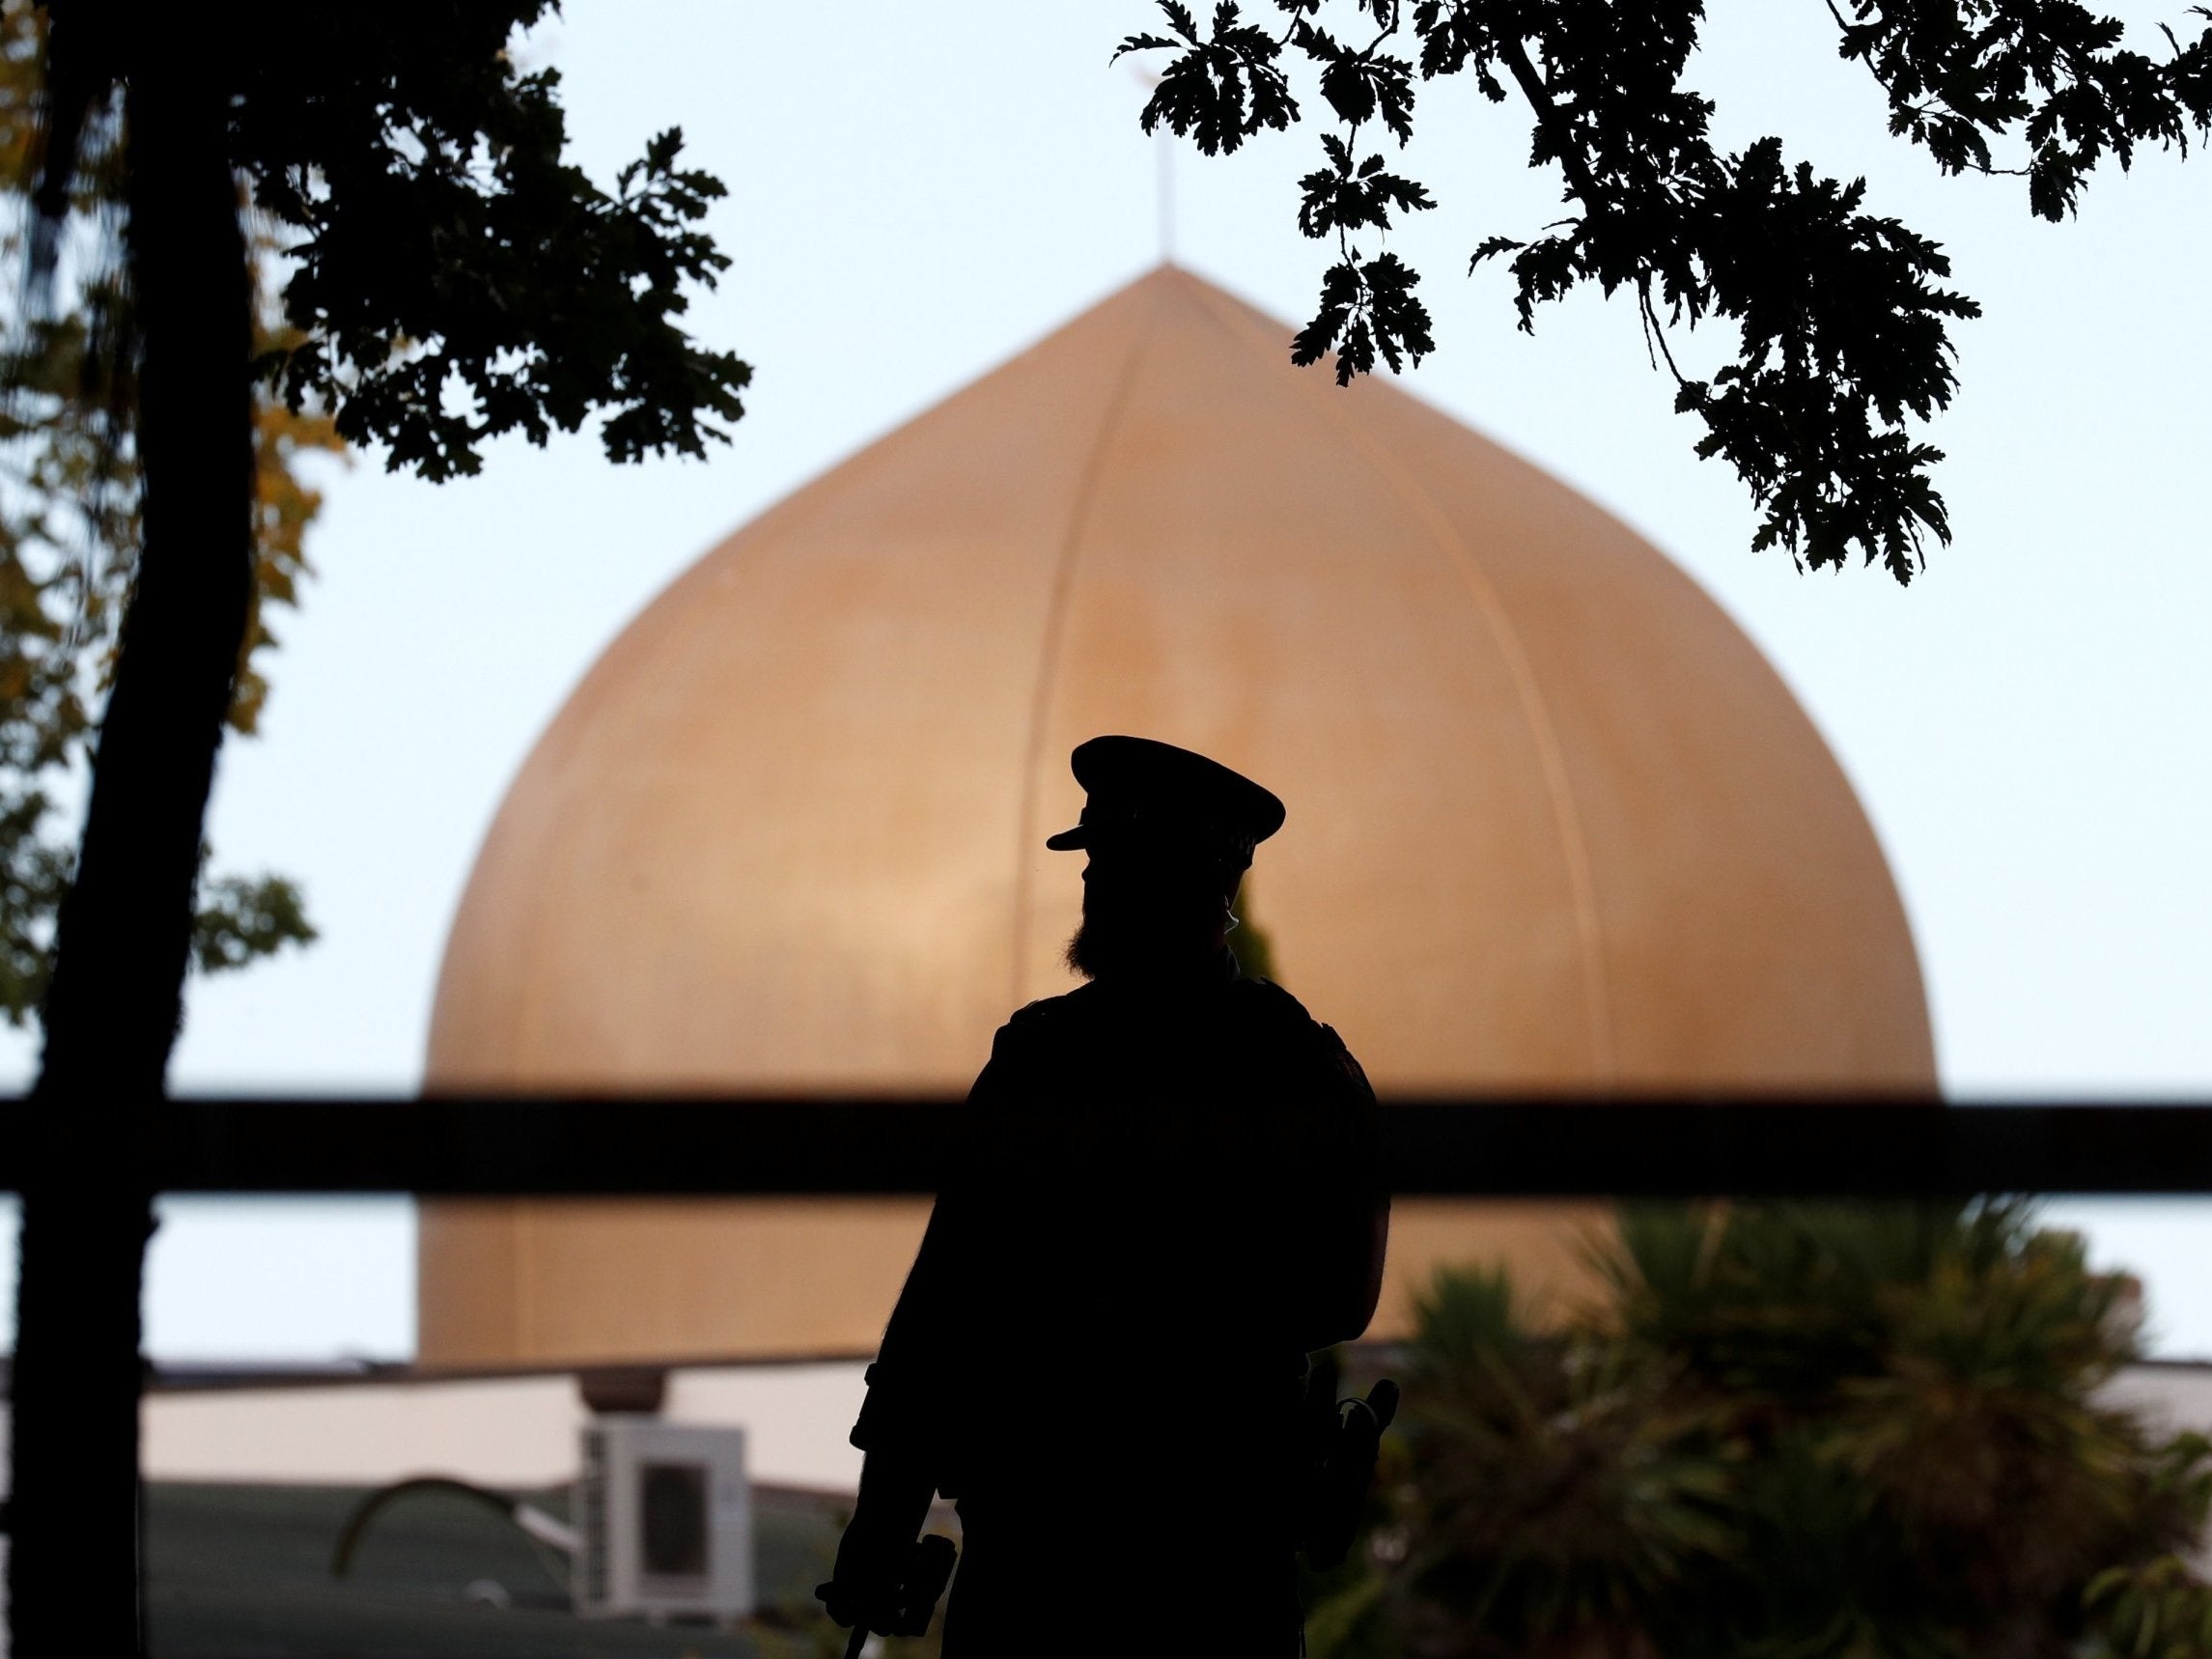 The Masjid Al Noor mosque in Christchurch, 51 people were killed in 2019